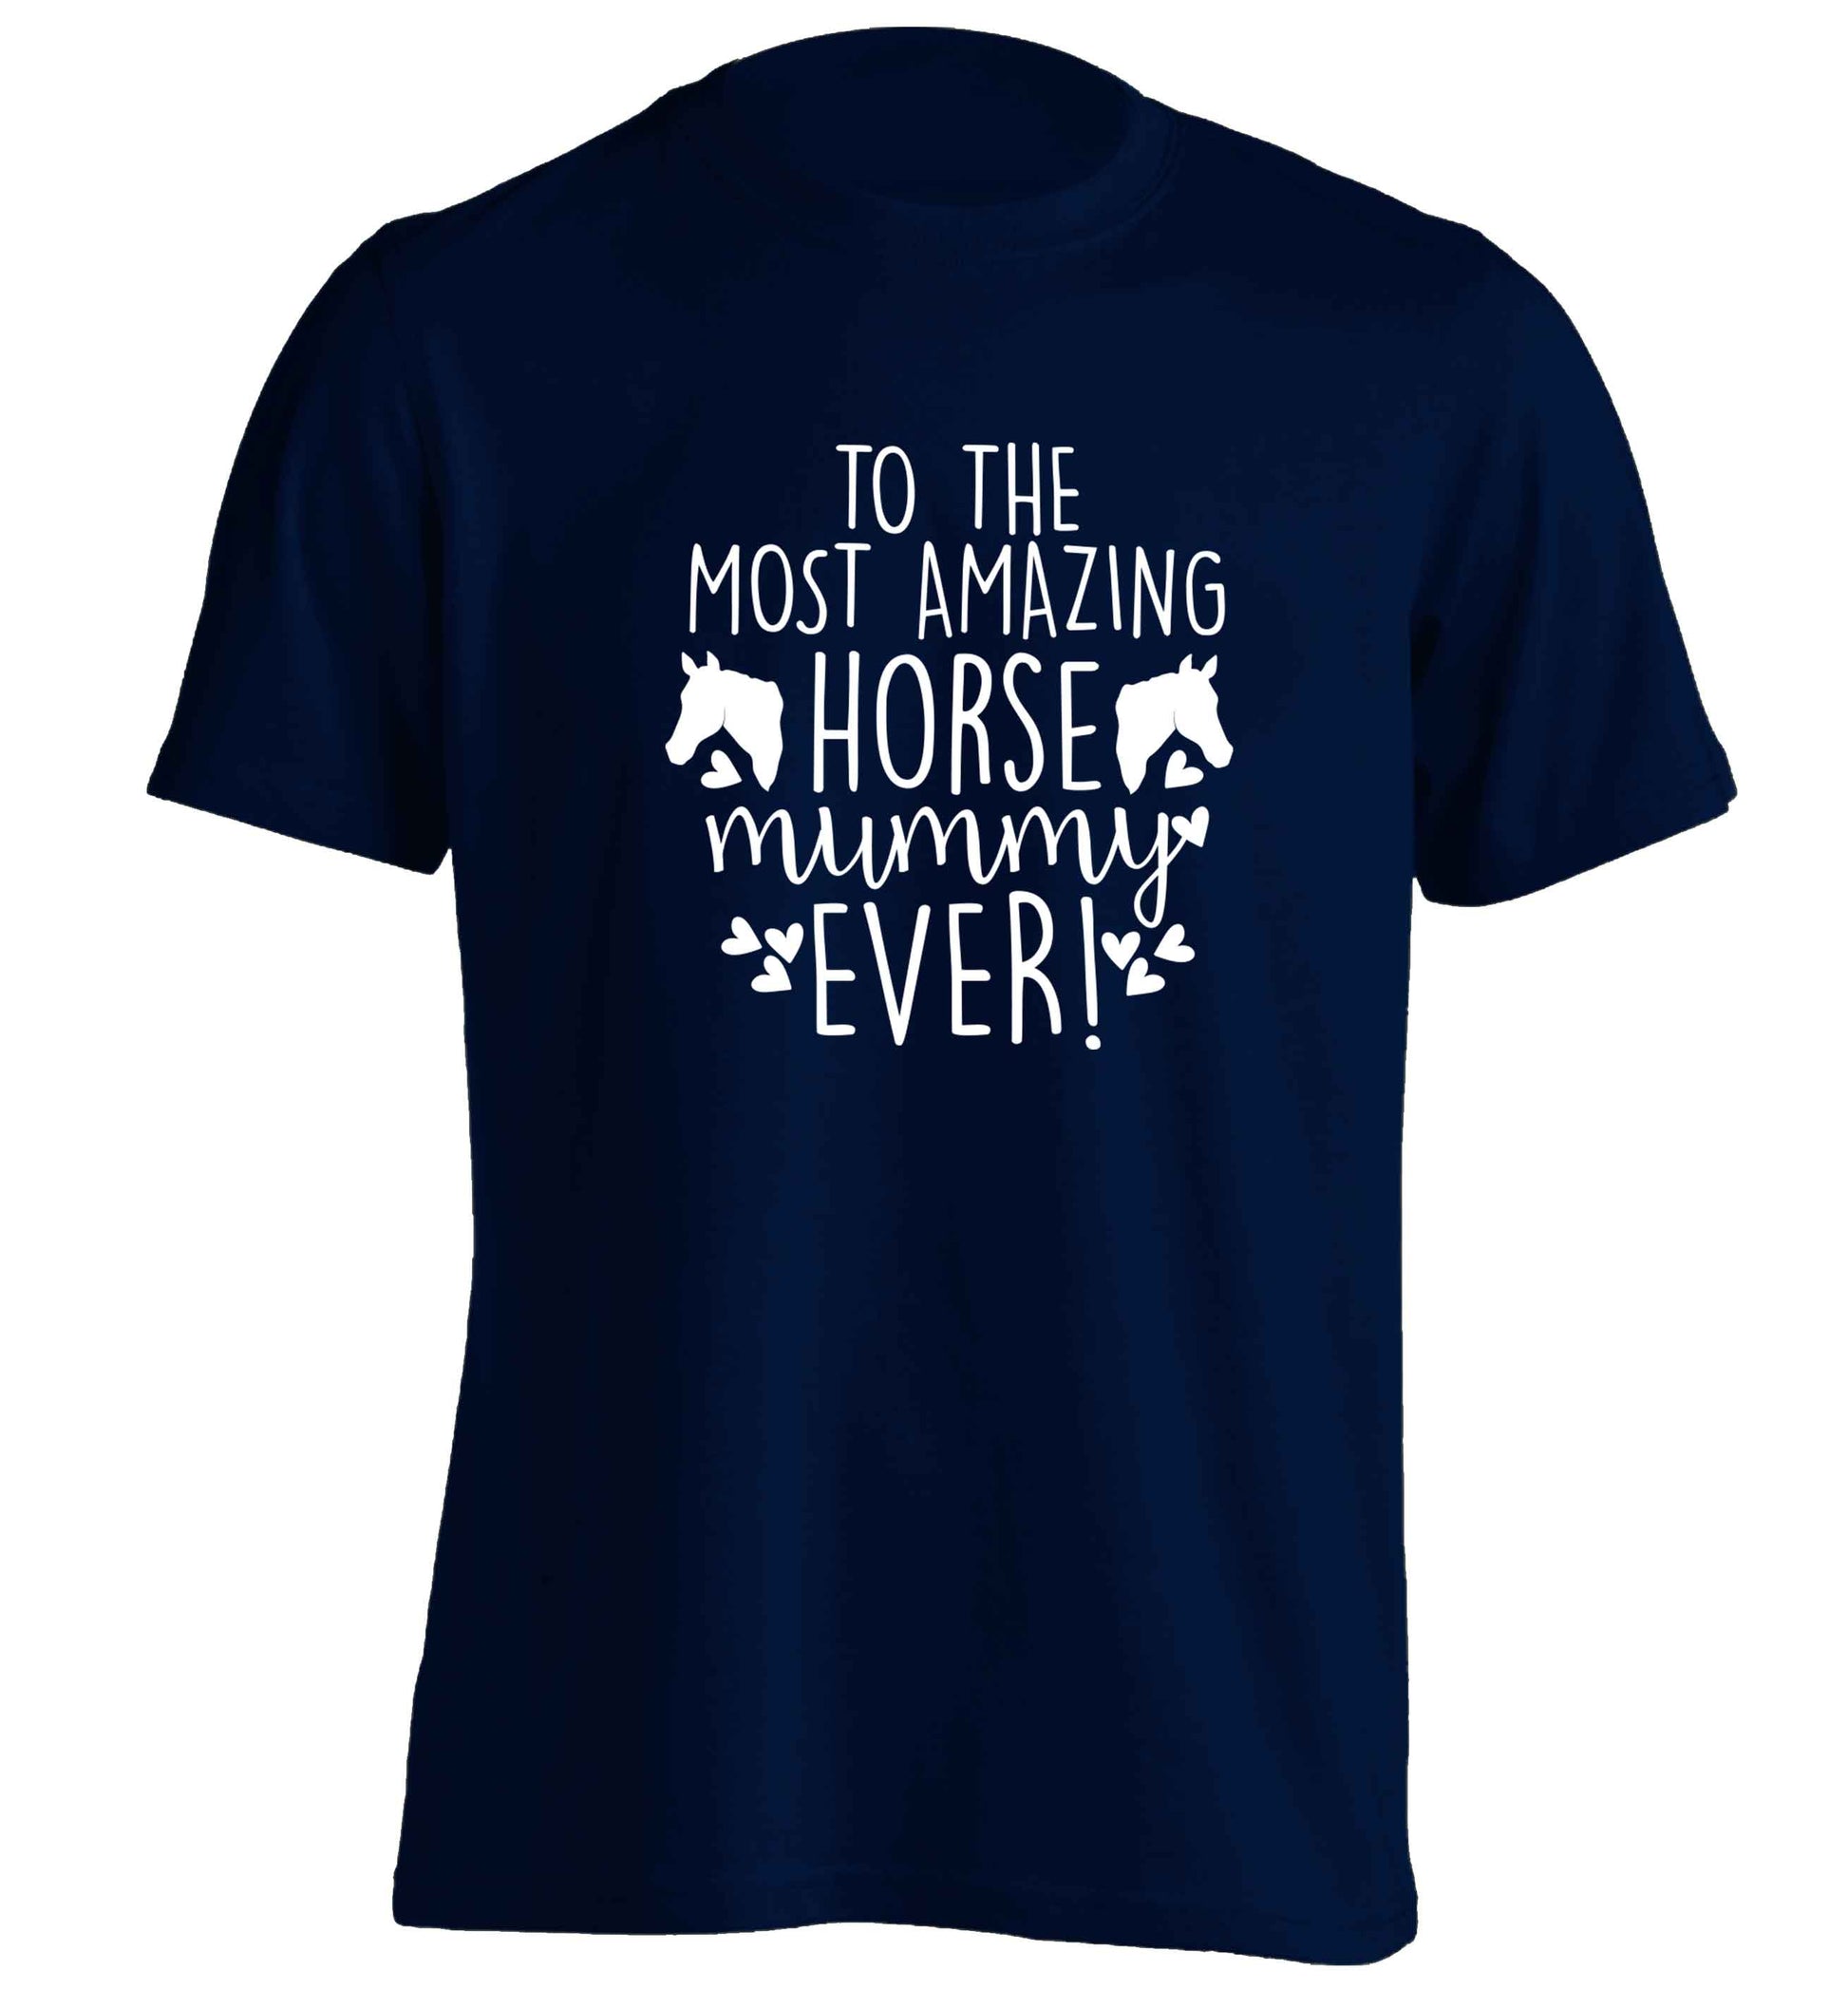 To the most amazing horse mummy ever! adults unisex navy Tshirt 2XL